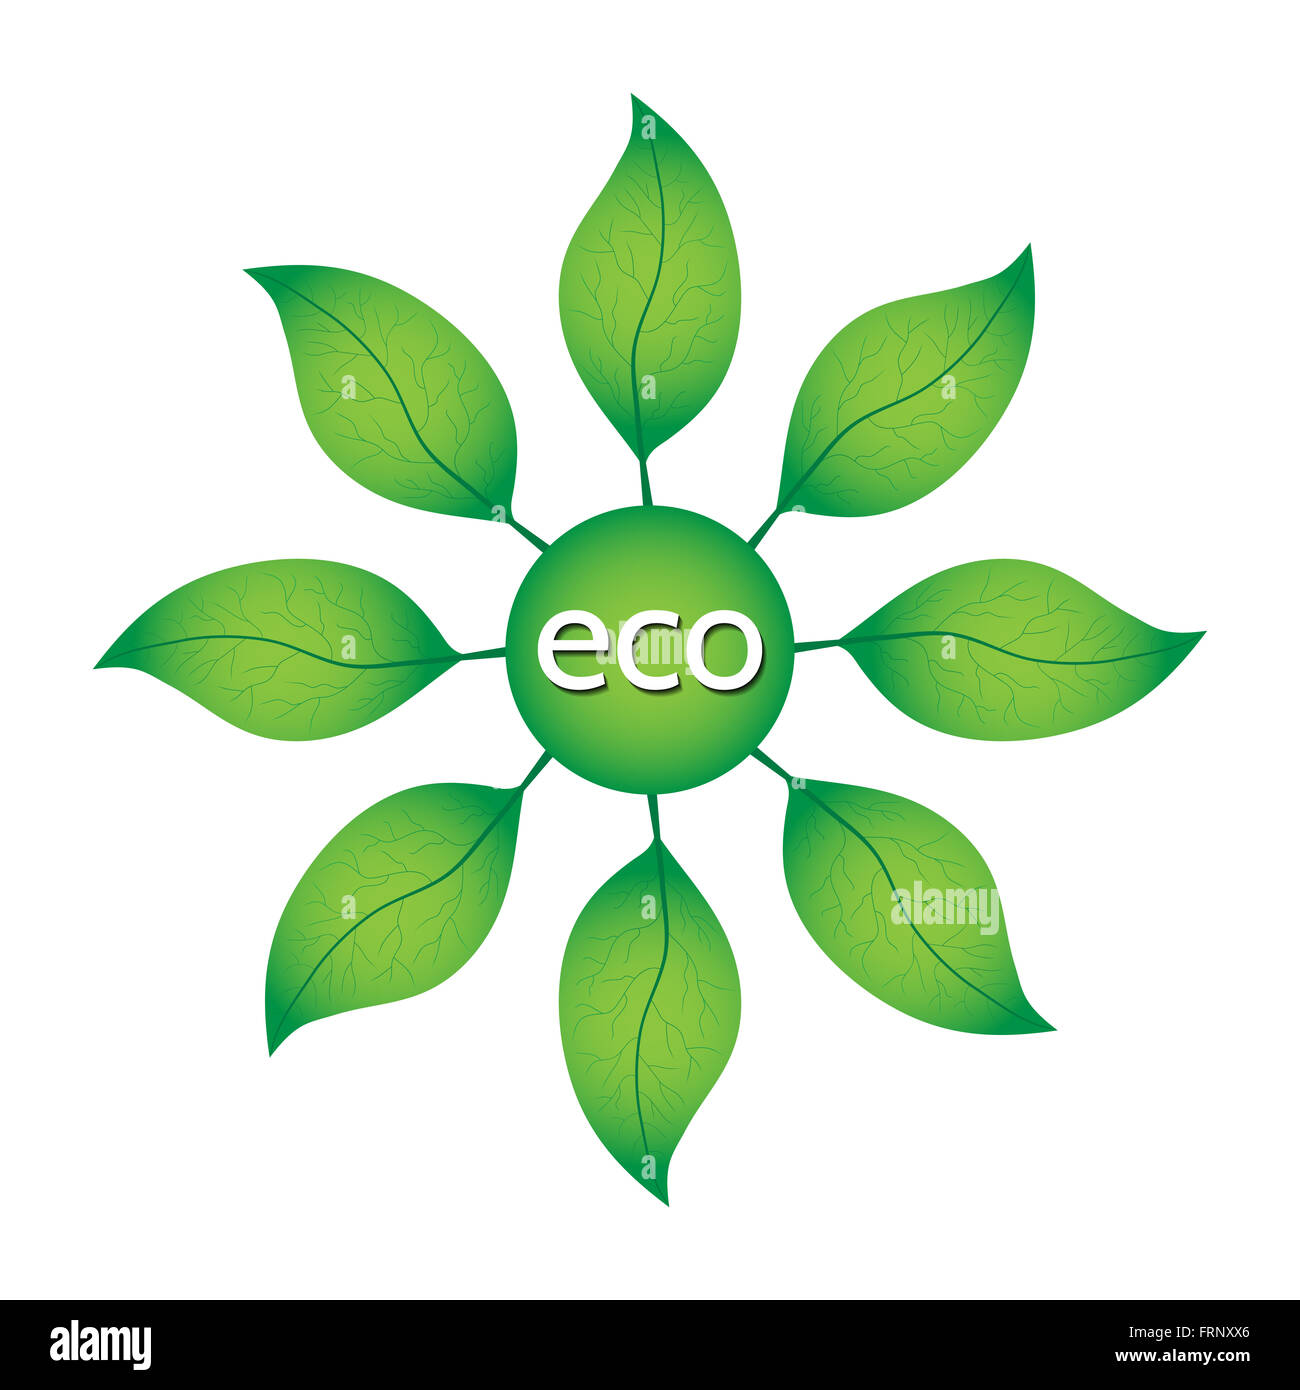 Ecological or environmental concept. Green leaves in a circle with ECO text on a white background. Stock Photo